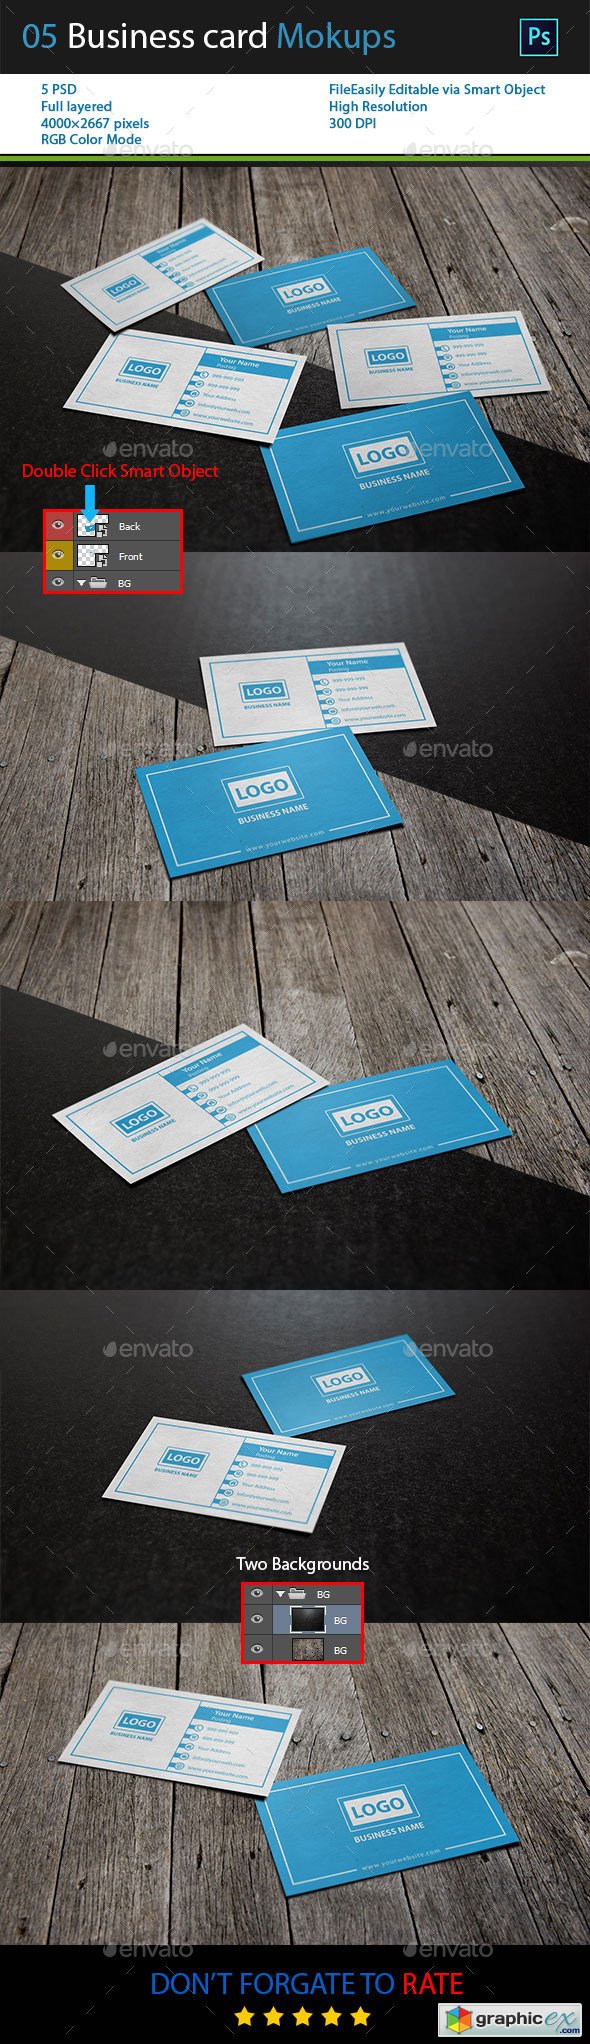 05 business Card Mockups with 2 Backgrounds